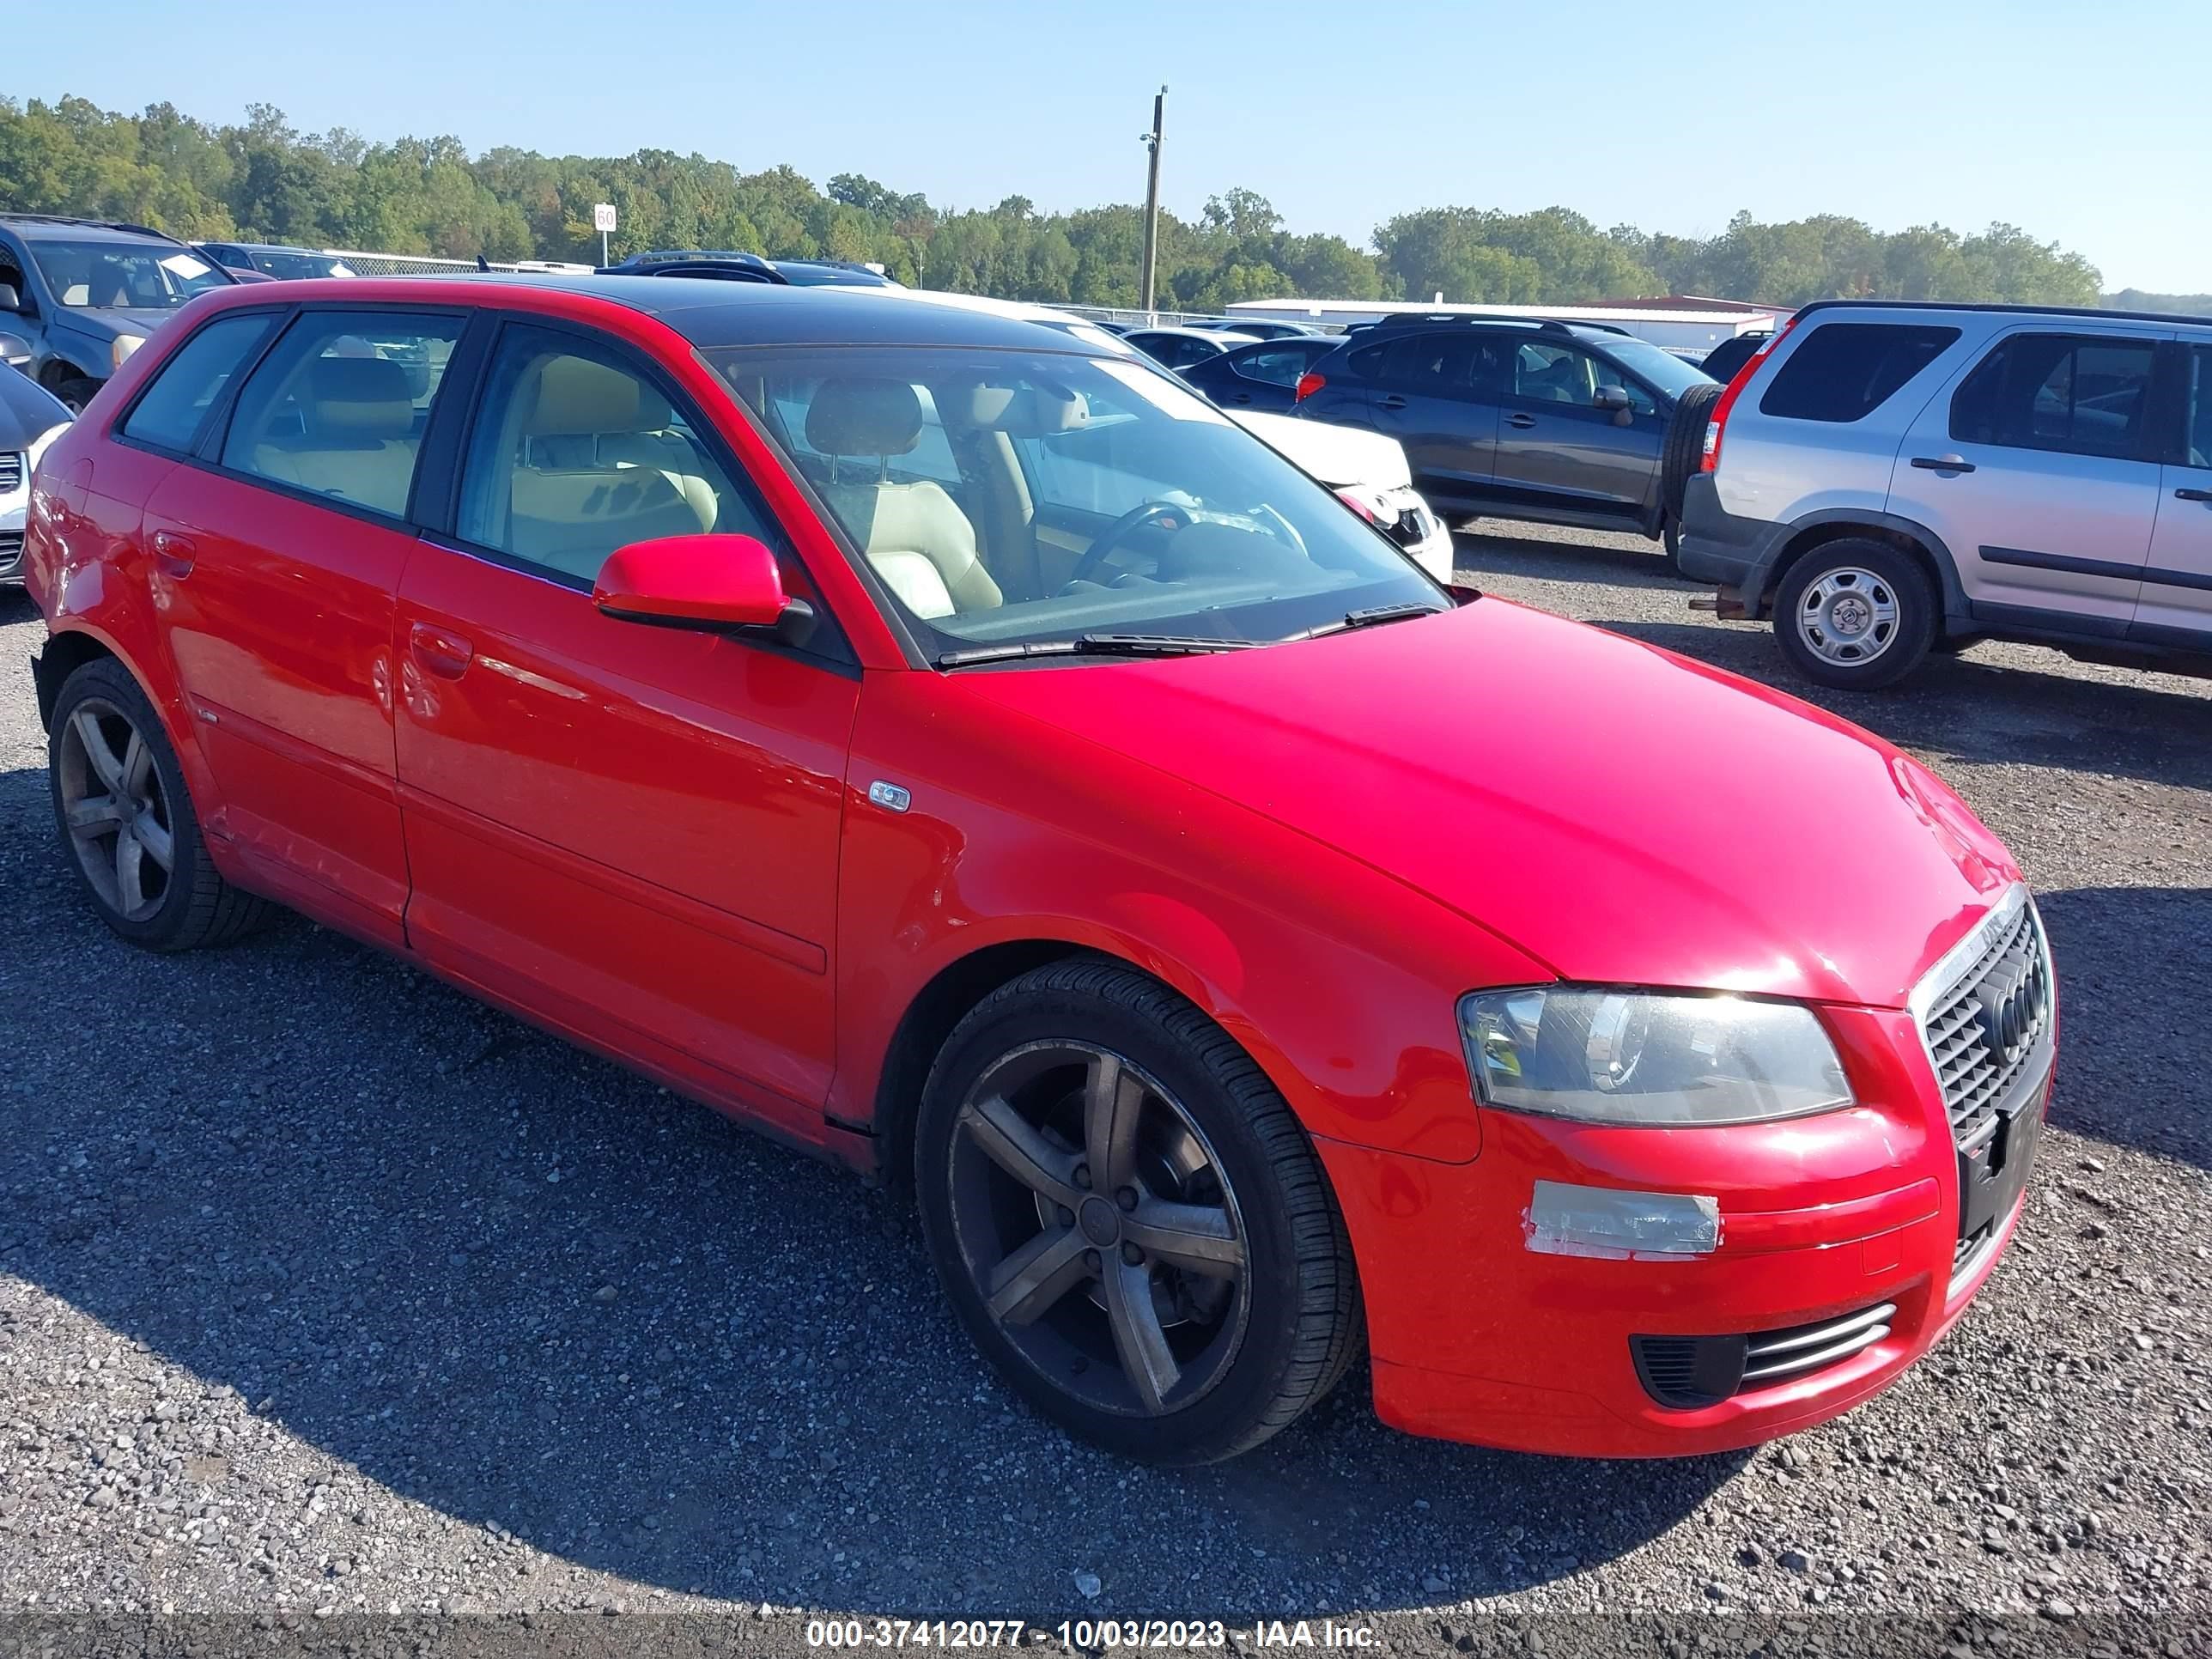 vin: WAUKD78PX8A040516 WAUKD78PX8A040516 2008 audi a3 3200 for Sale in 21921, 183 Zeitler Rd, Elkton, Maryland, USA